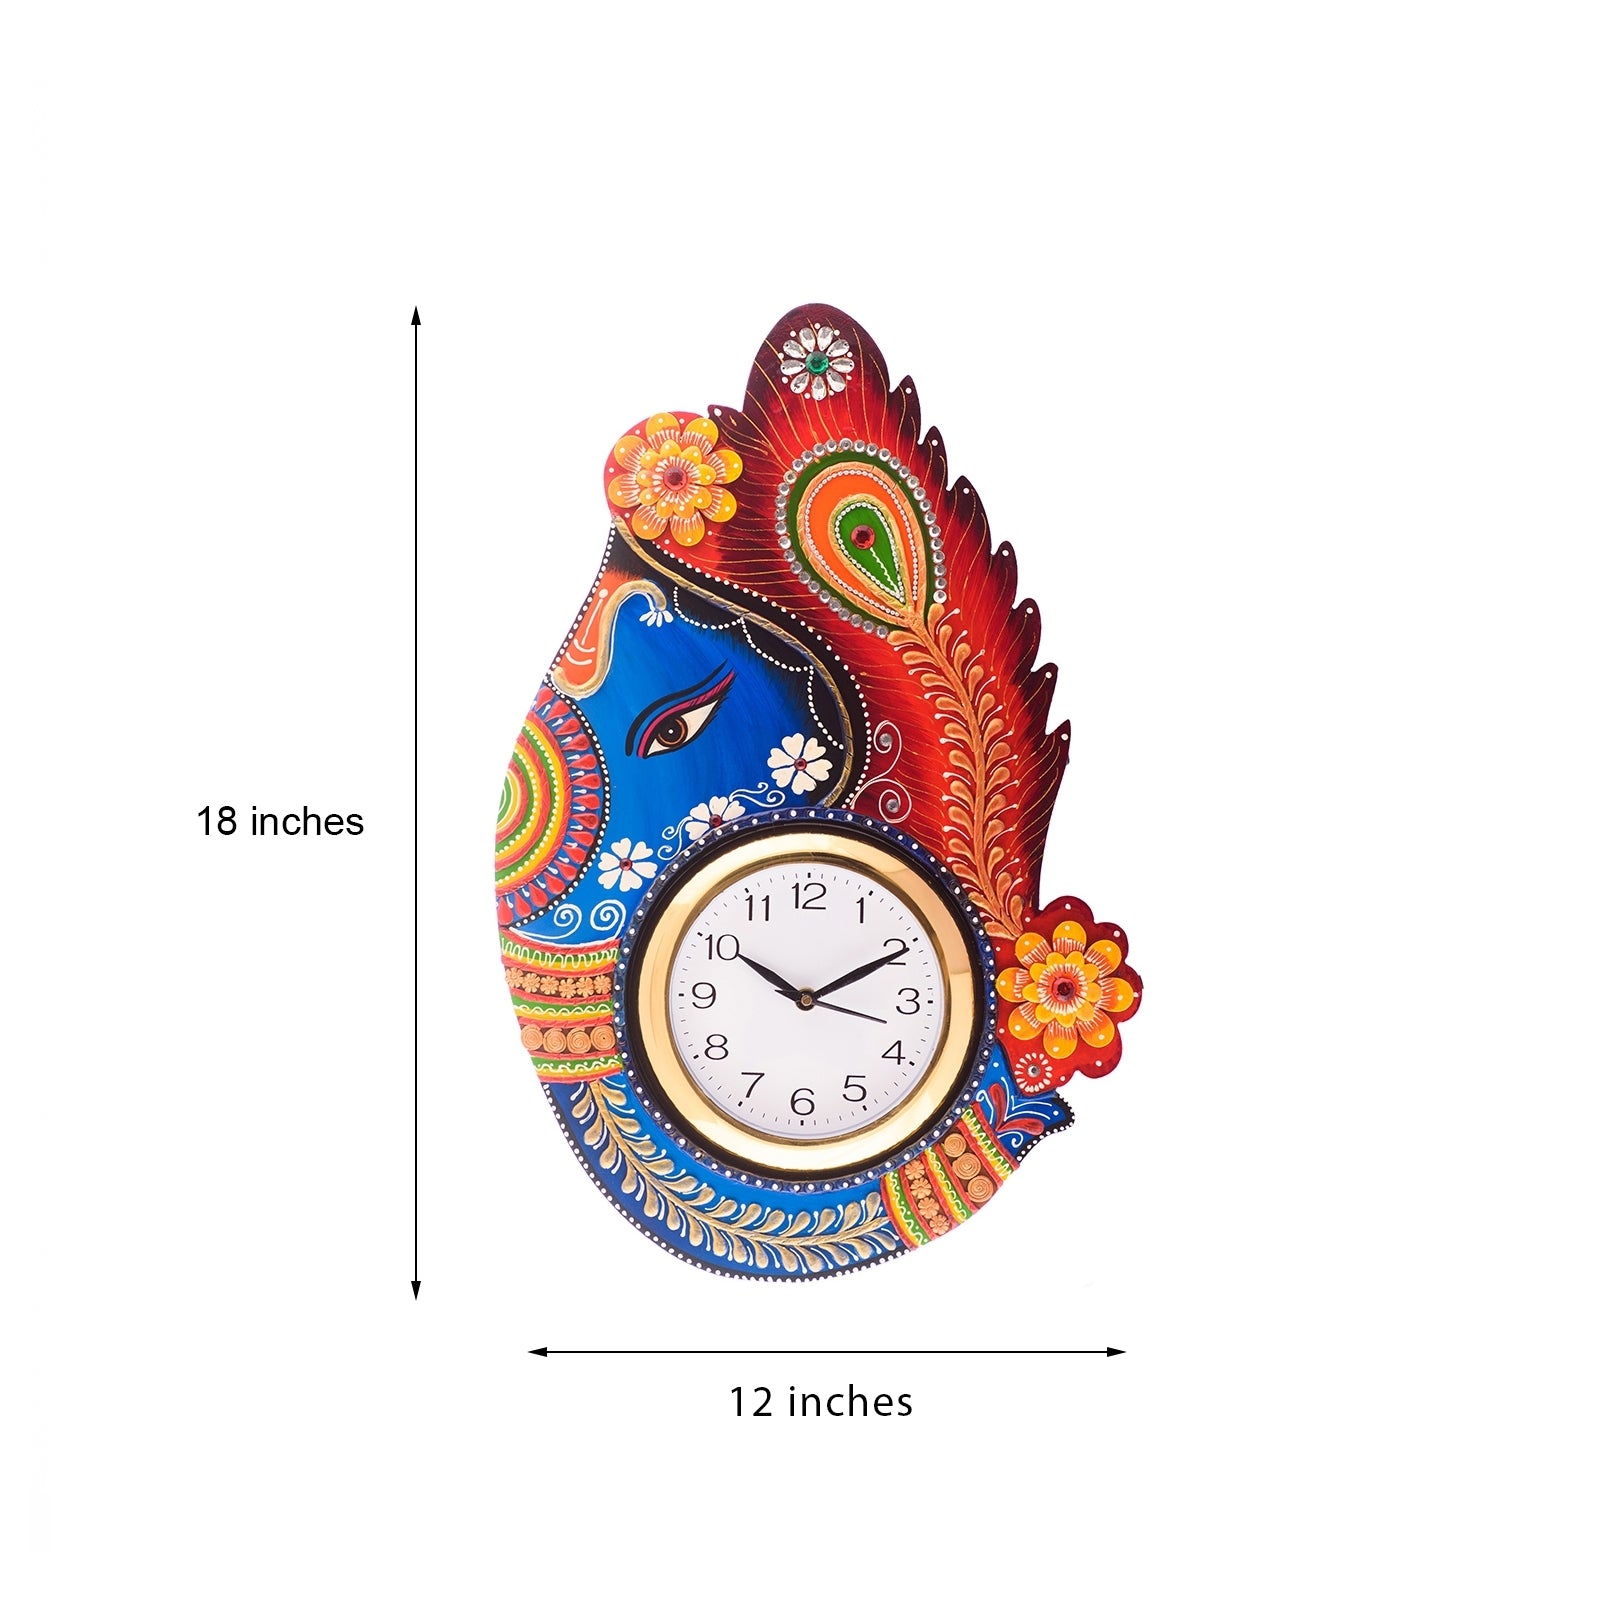 Turban Lord Ganesha Colorful Wooden Handcrafted Wooden Wall Clock (H - 18Inch) 2